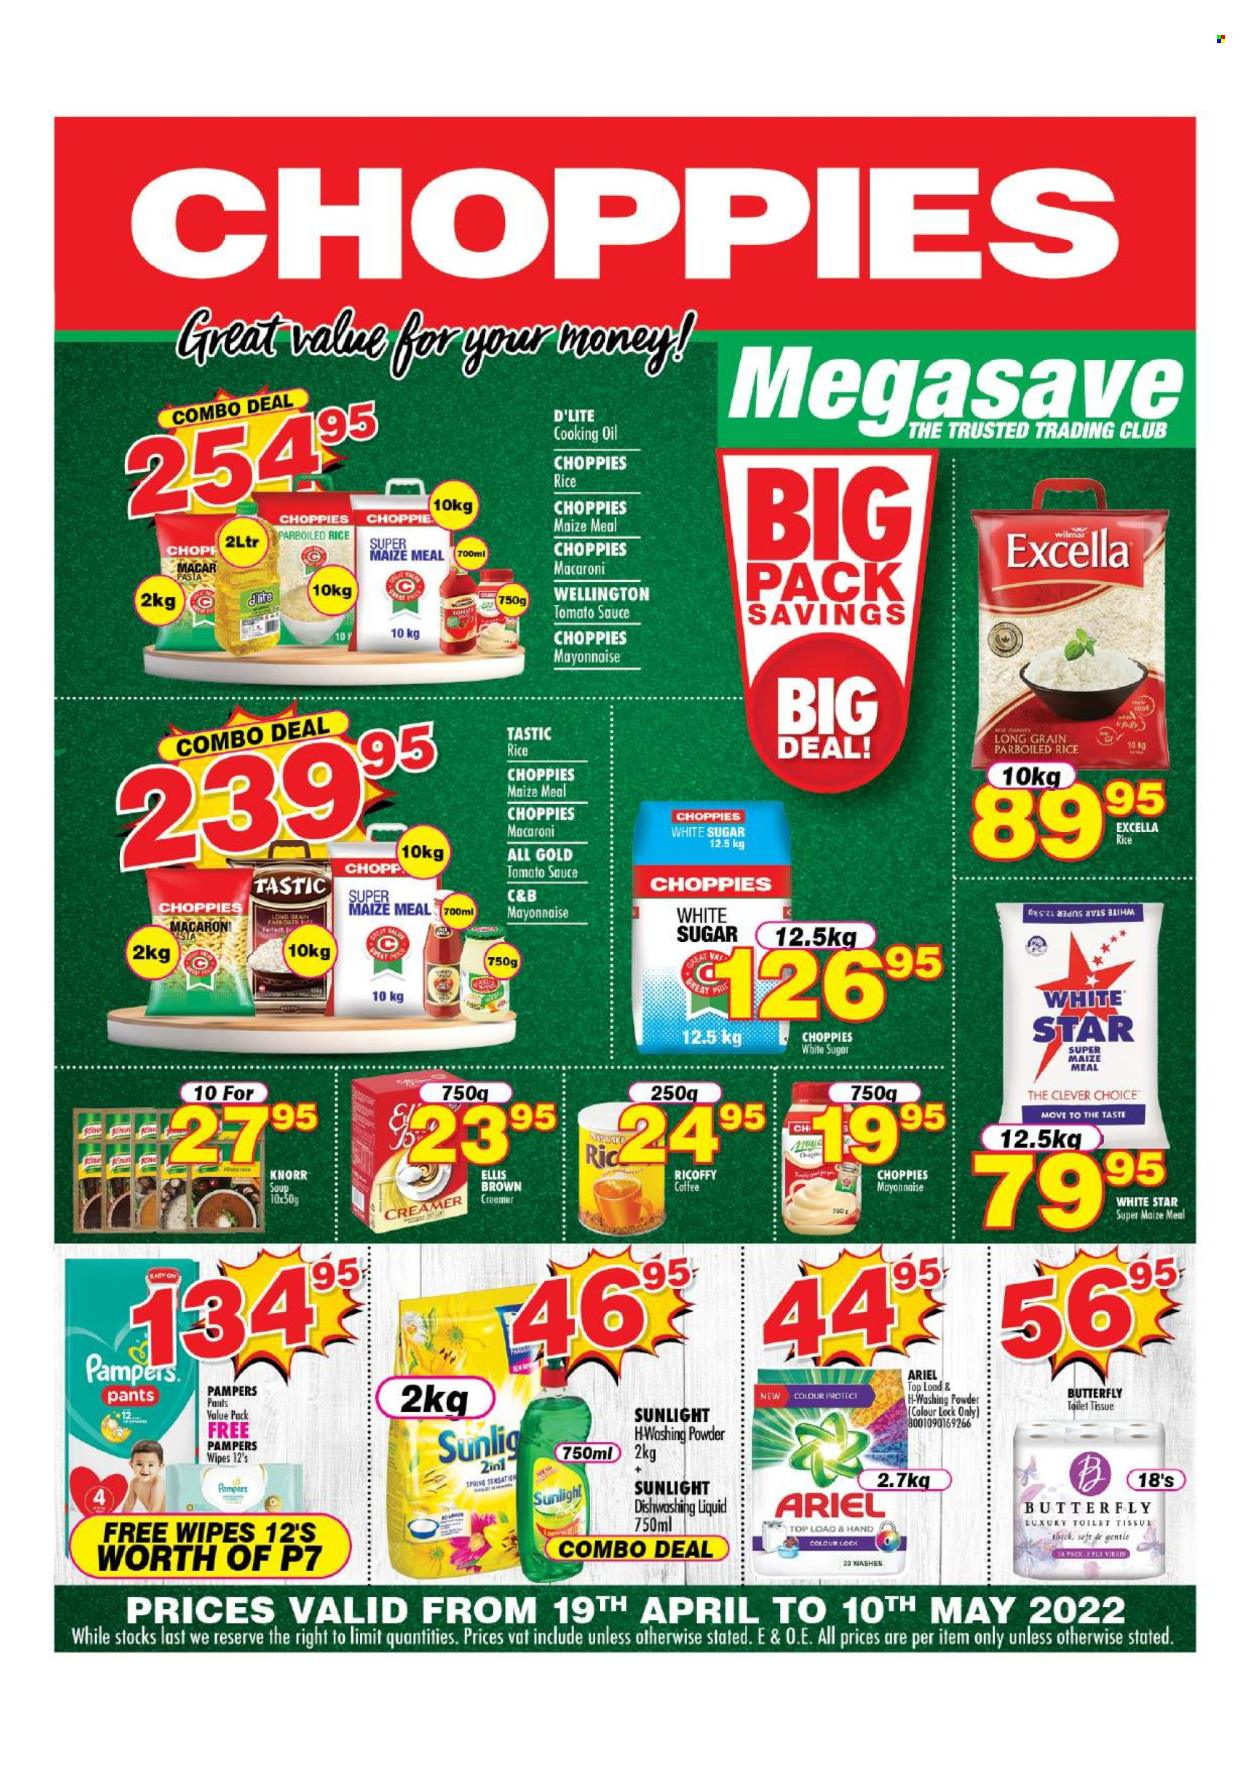 thumbnail - Choppies catalogue  - 19/04/2024 - 10/05/2024 - Sales products - macaroni, soup, pasta, Knorr, Ellis Brown, creamer, mayonnaise, sugar, maize meal, White Star, tomato sauce, white rice, parboiled rice, Tastic, oil, cooking oil, coffee, Ricoffy, Nescafé, wipes, Pampers, pants, baby wipes, nappies, toilet paper, Ariel, laundry powder, Sunlight, dishwashing liquid. Page 1.